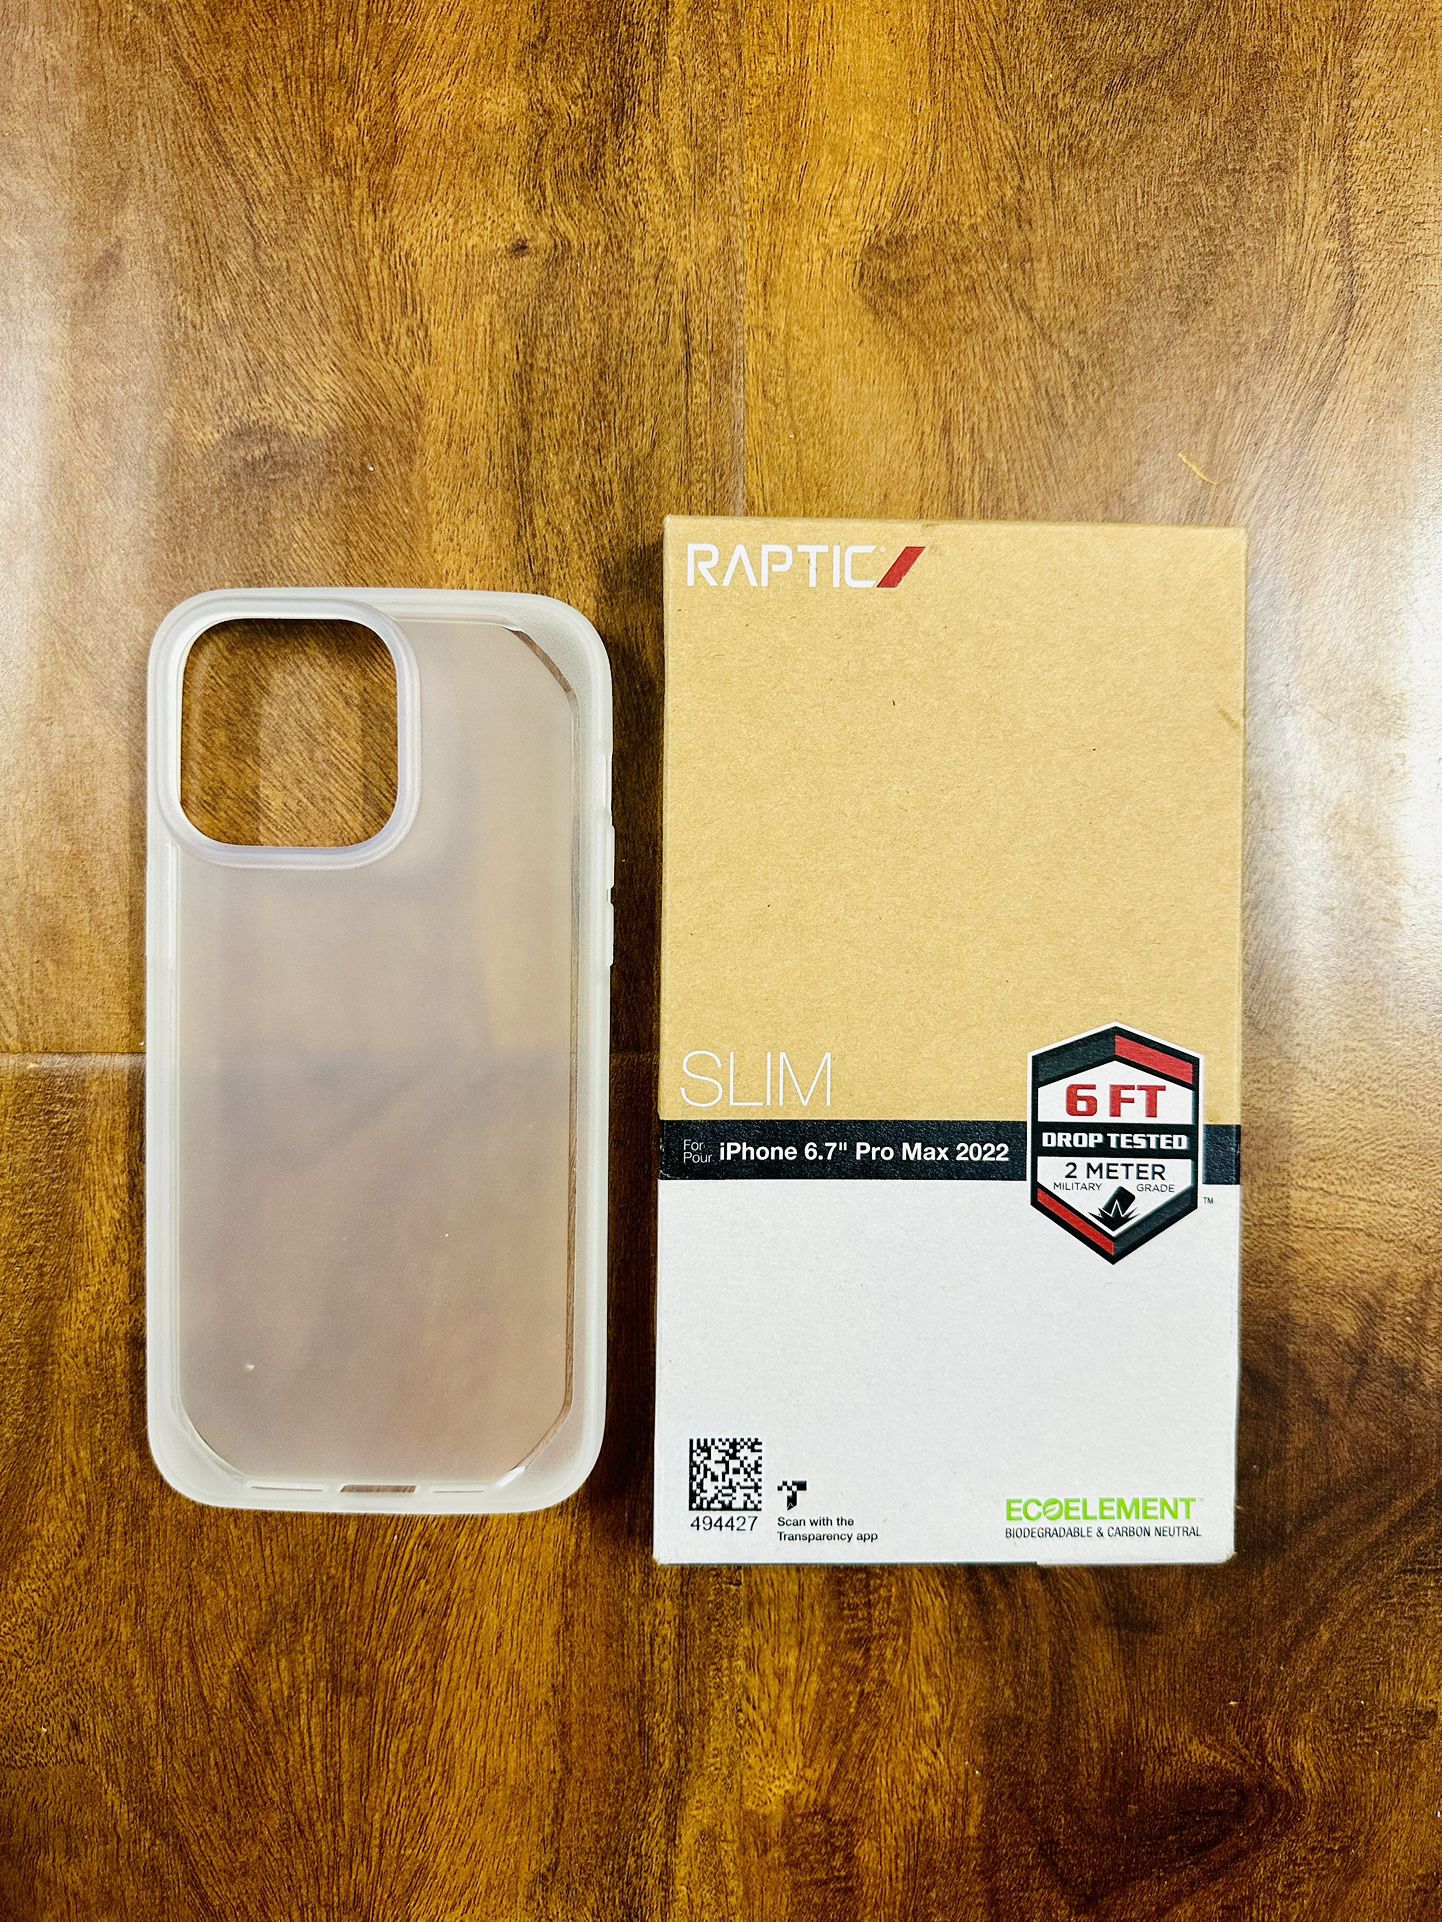 Case For iPhone 14 Pro Max New Condition